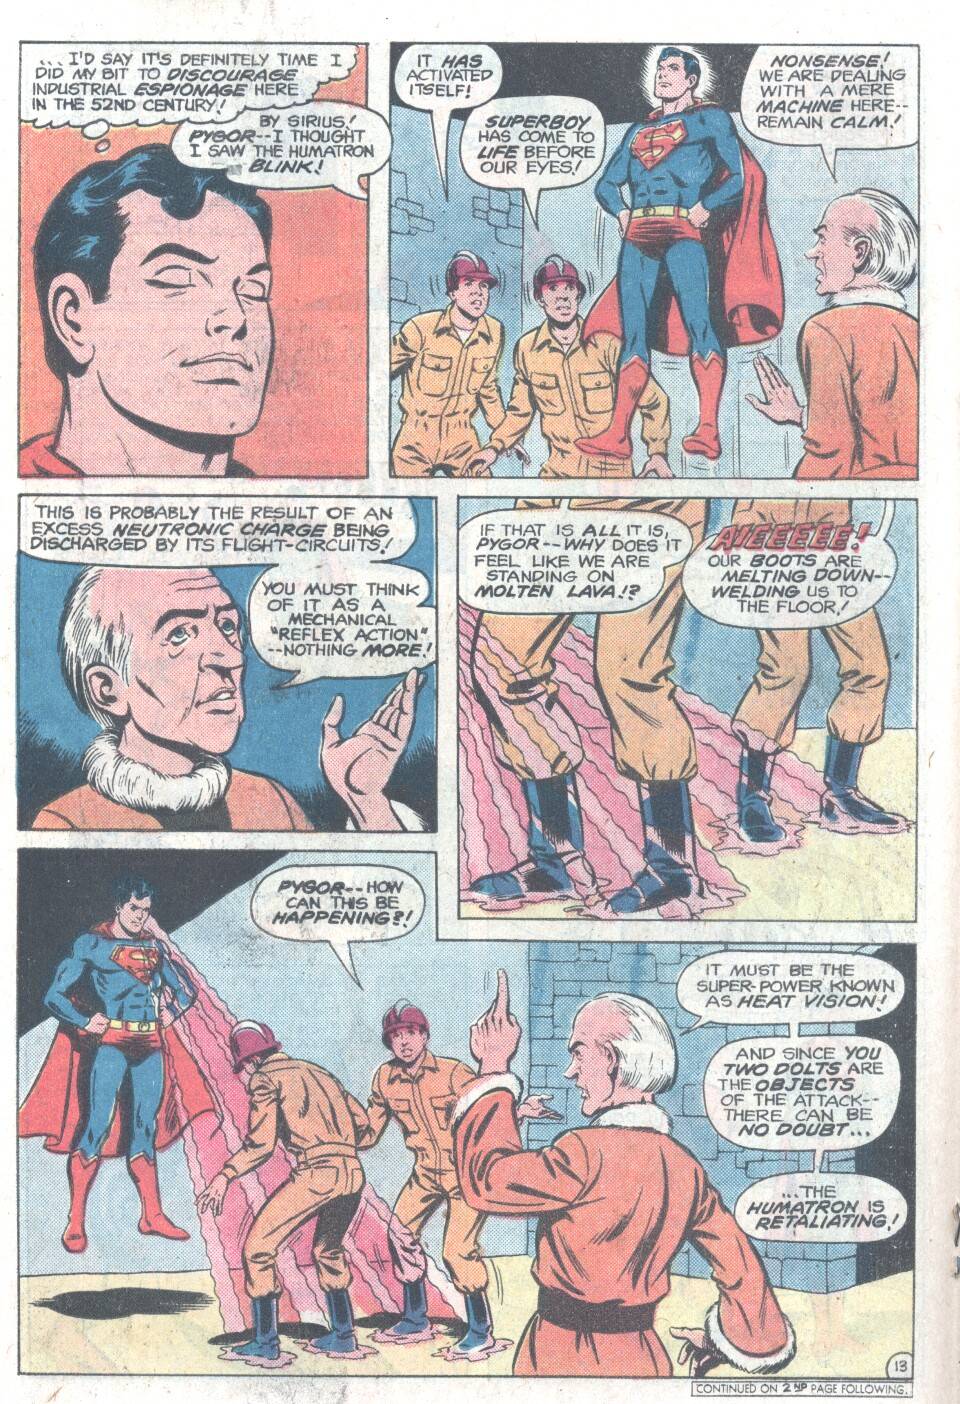 The New Adventures of Superboy 10 Page 13